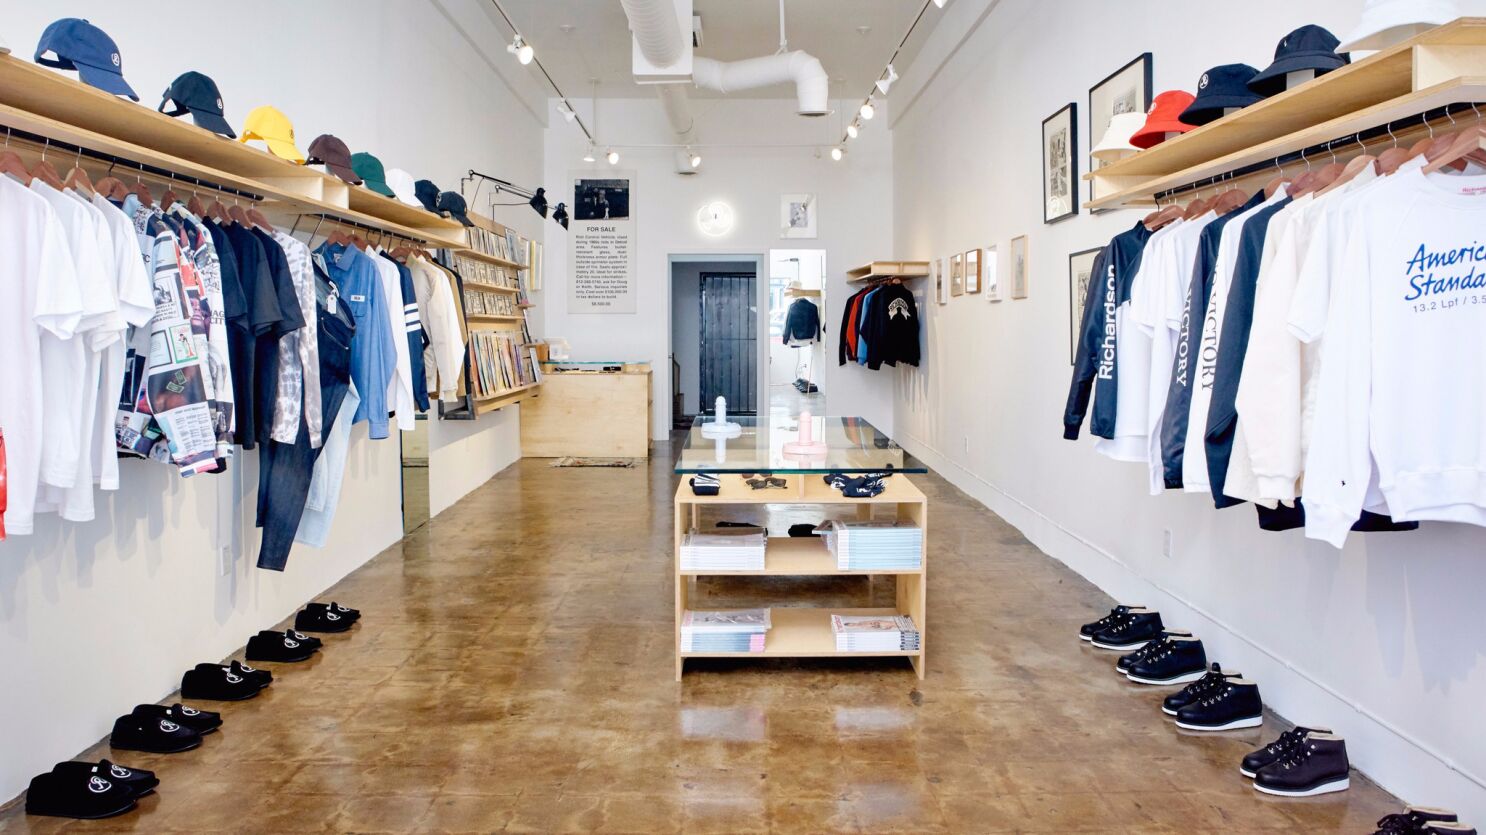 Richardson brings its provocative mix of streetwear to West 3rd